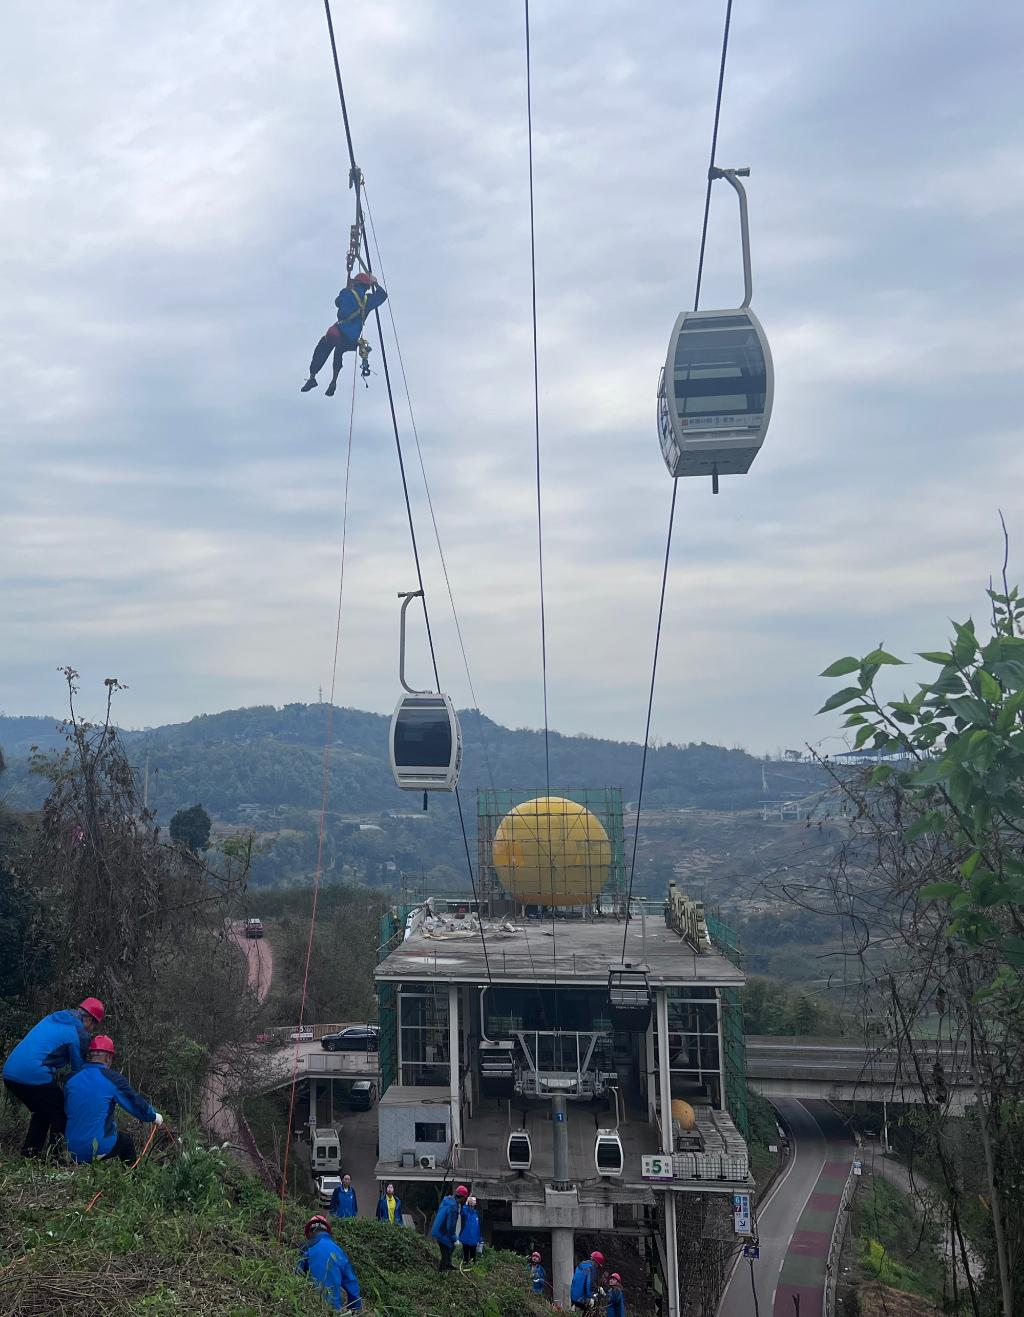 Mexin Wine Town conducted cableway emergency rescue drill (Photo provided by the interviewee)